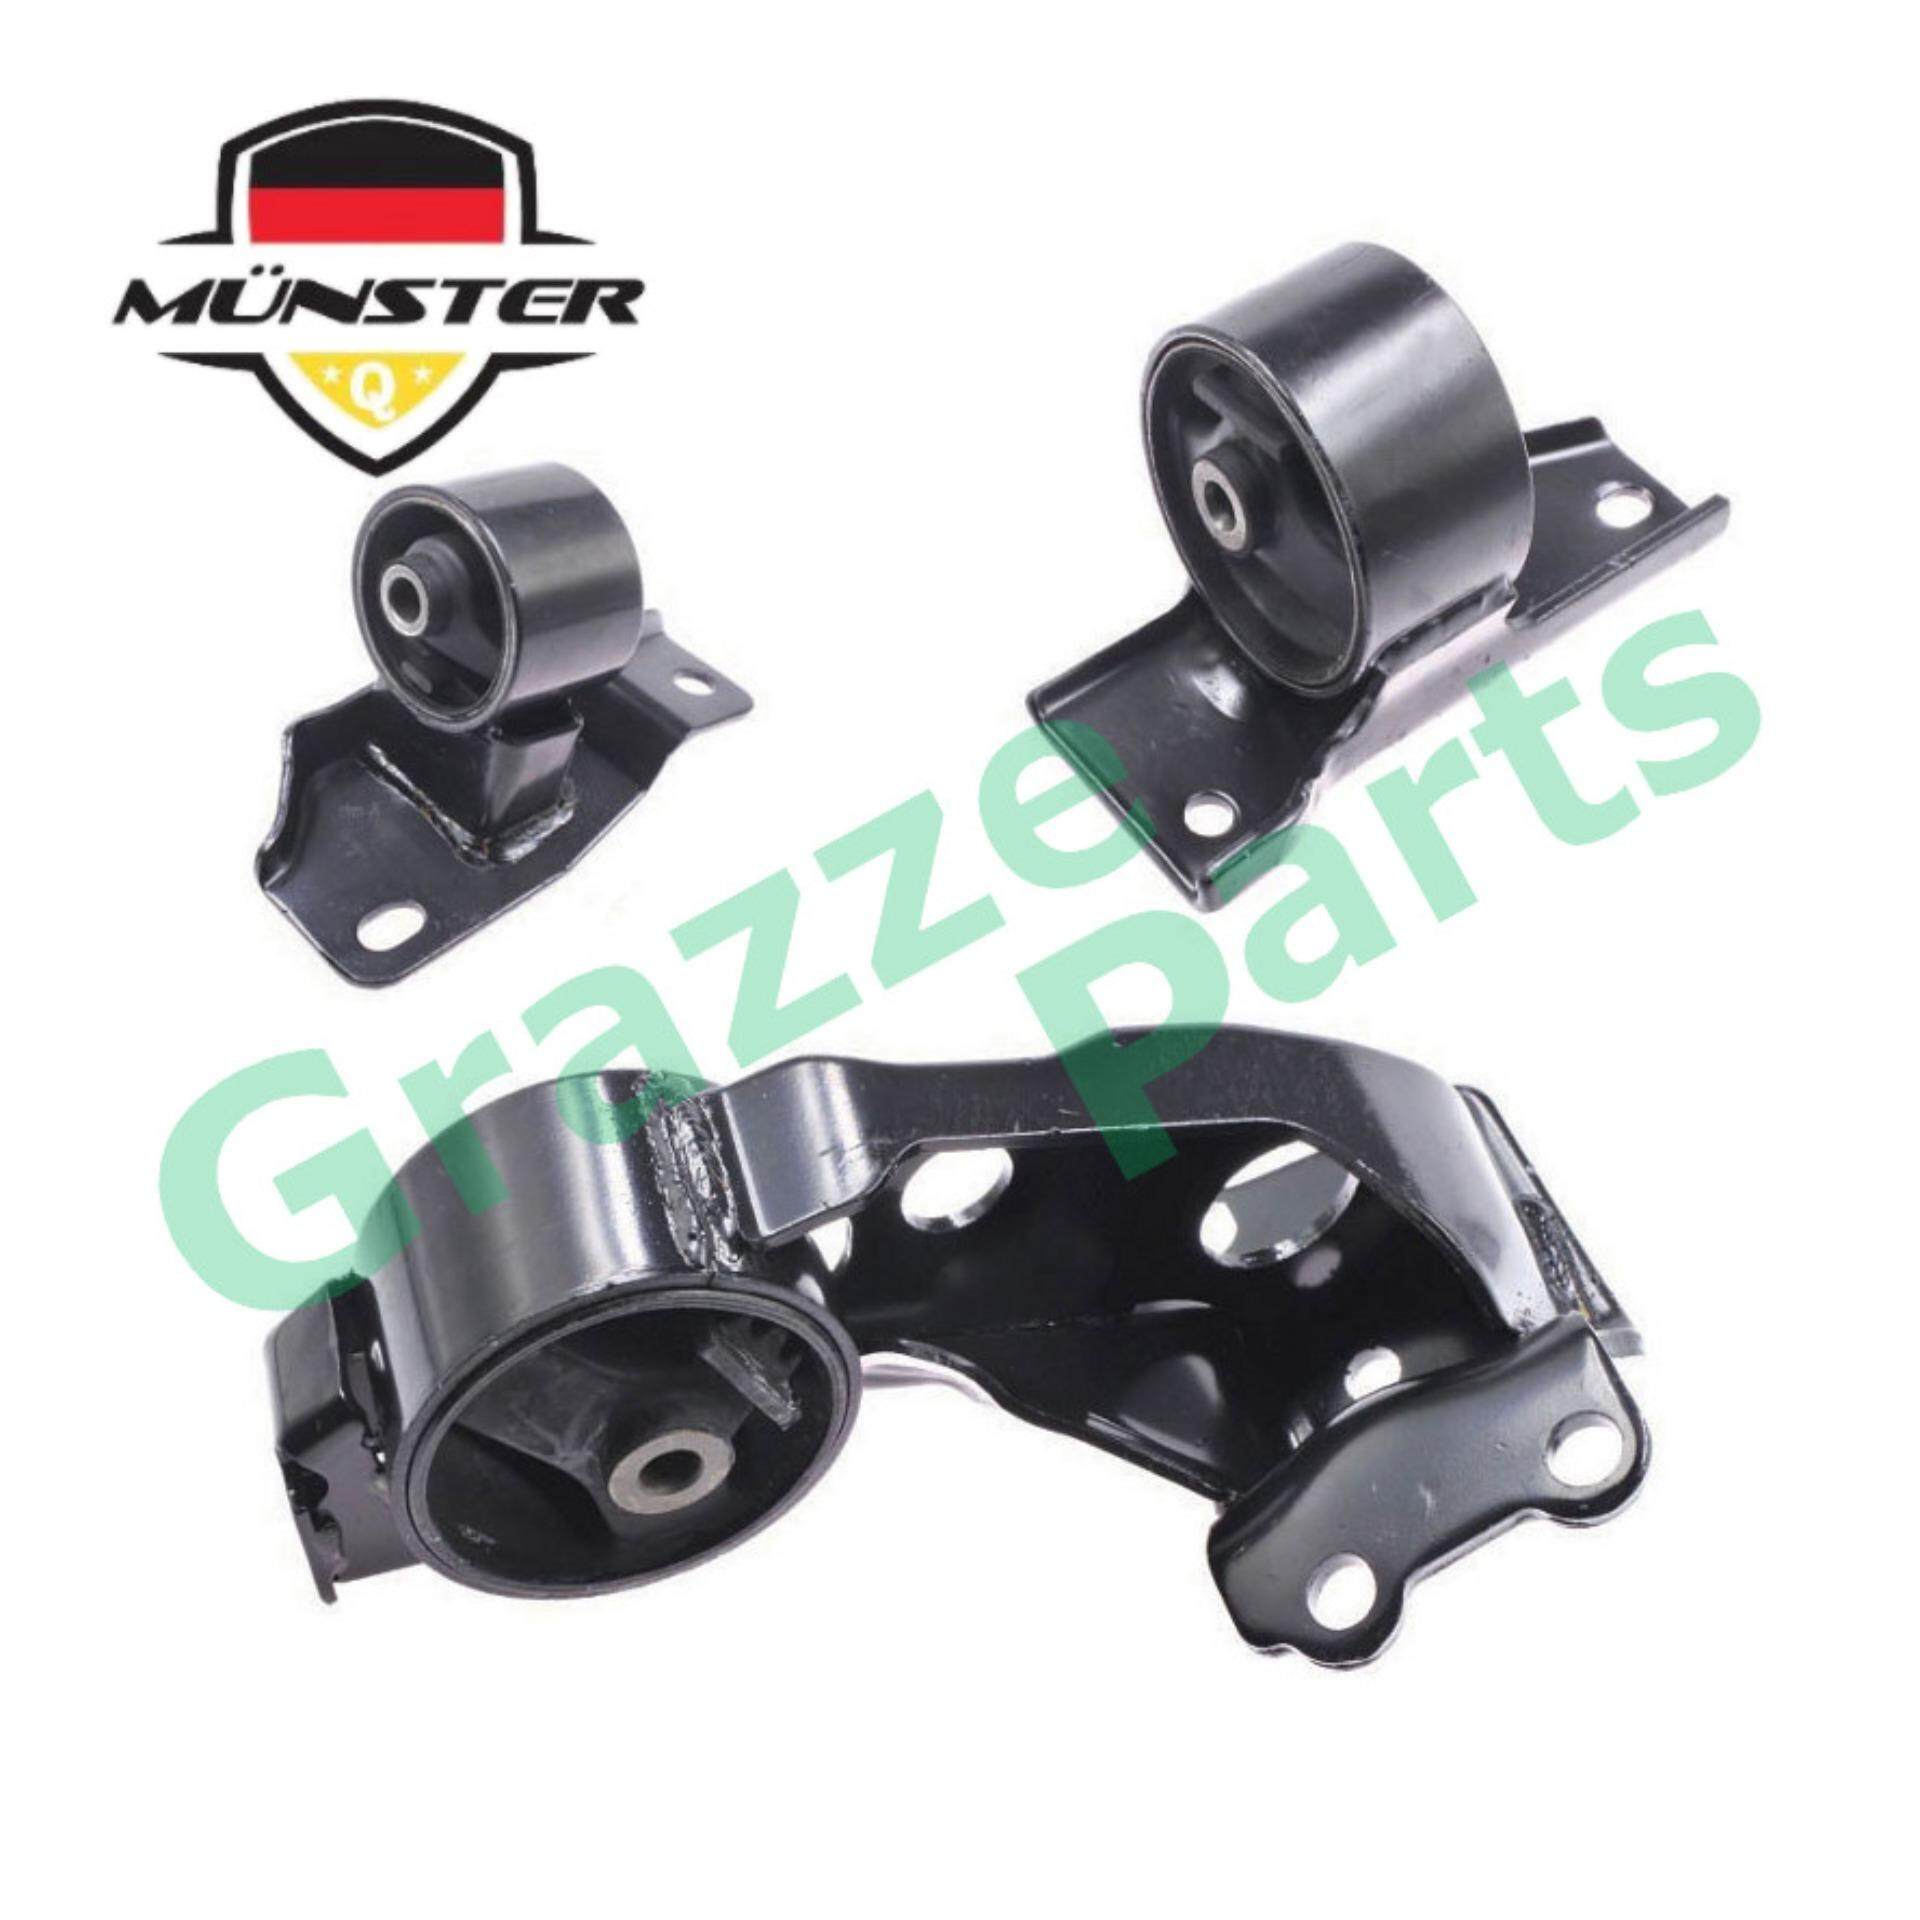 Münster Präzision Technology PER7479 Engine Mounting Set for Perodua Kancil 850 Auto Transmission